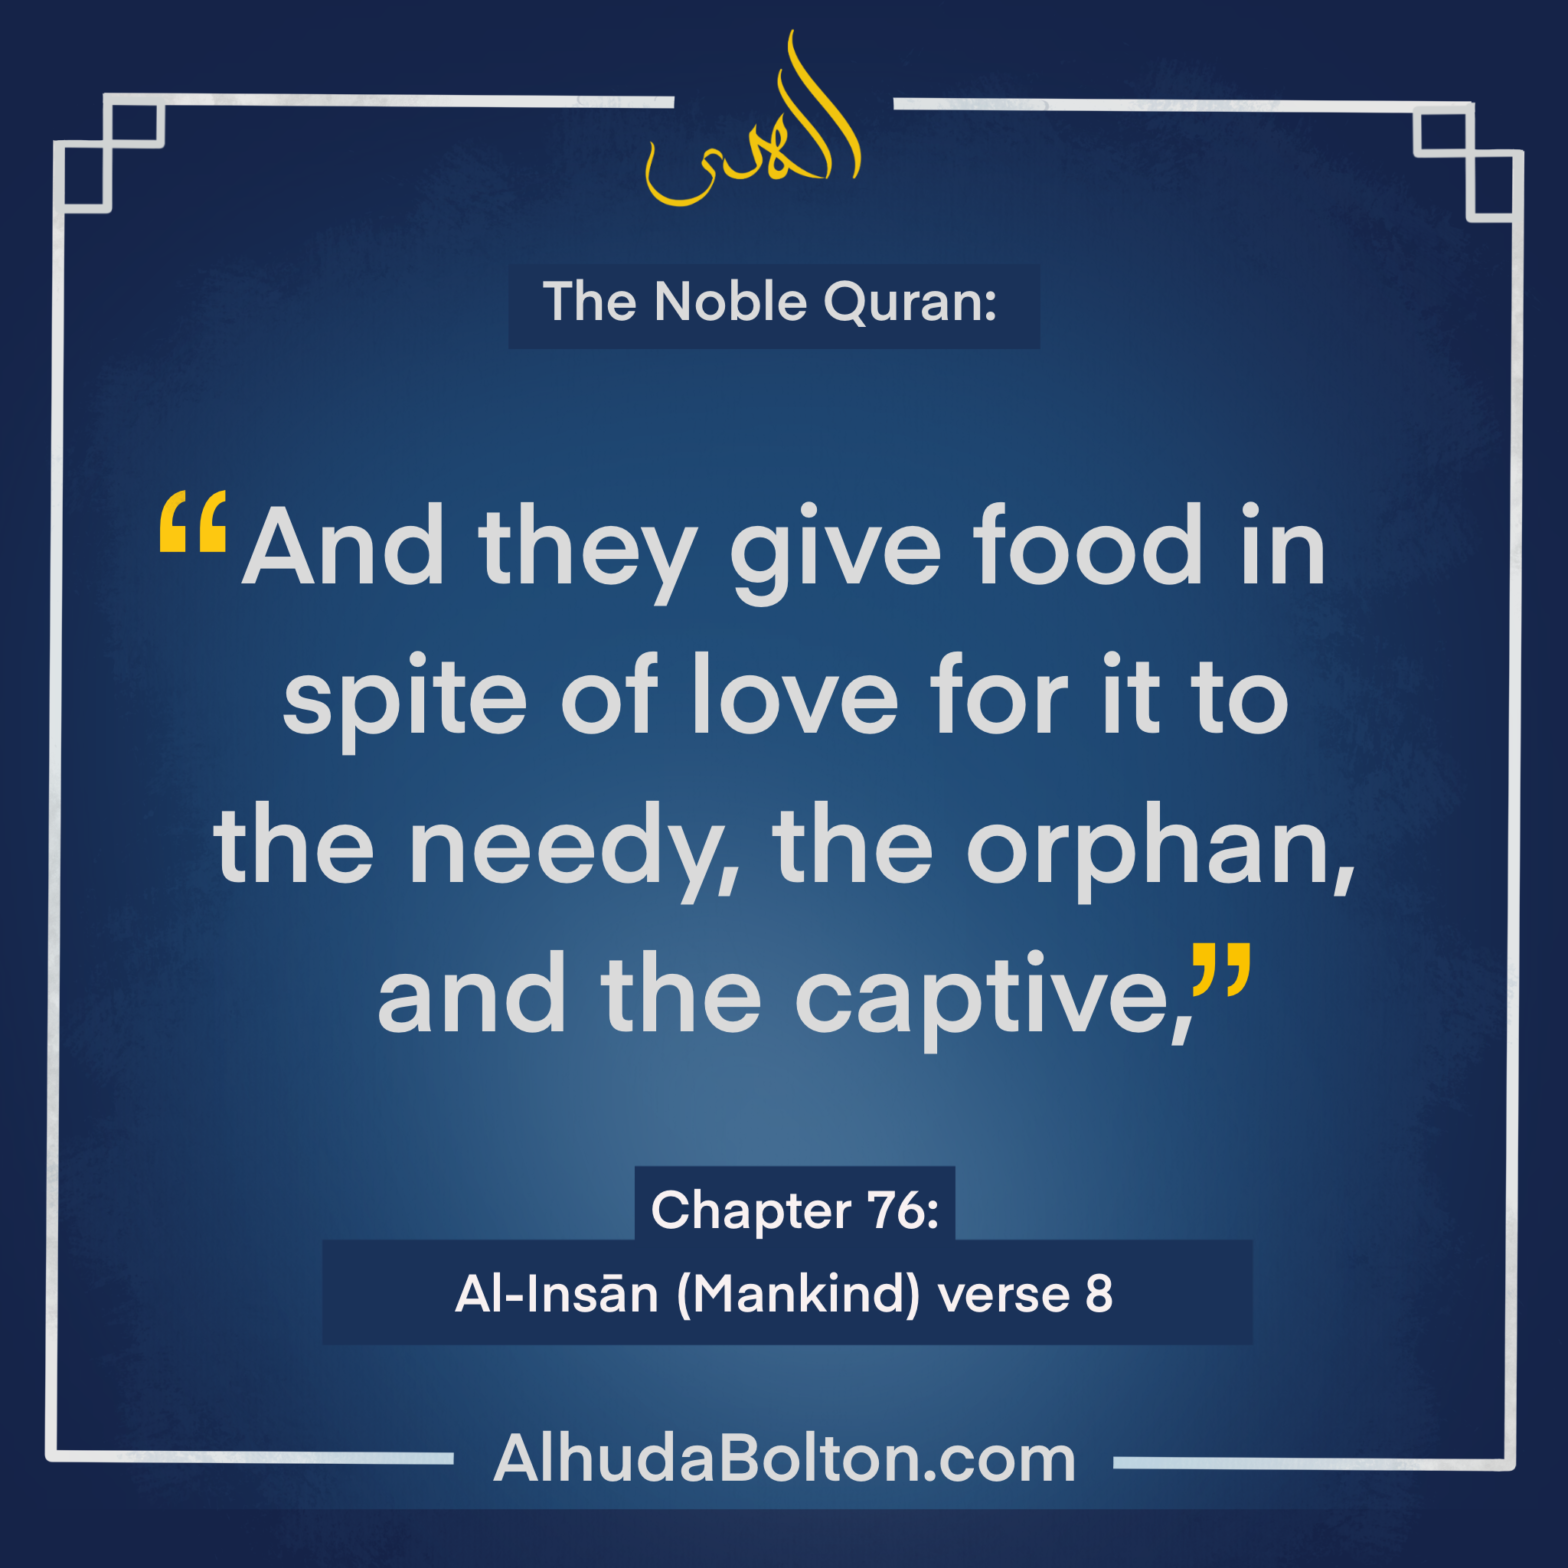 Quran: Giving Charity